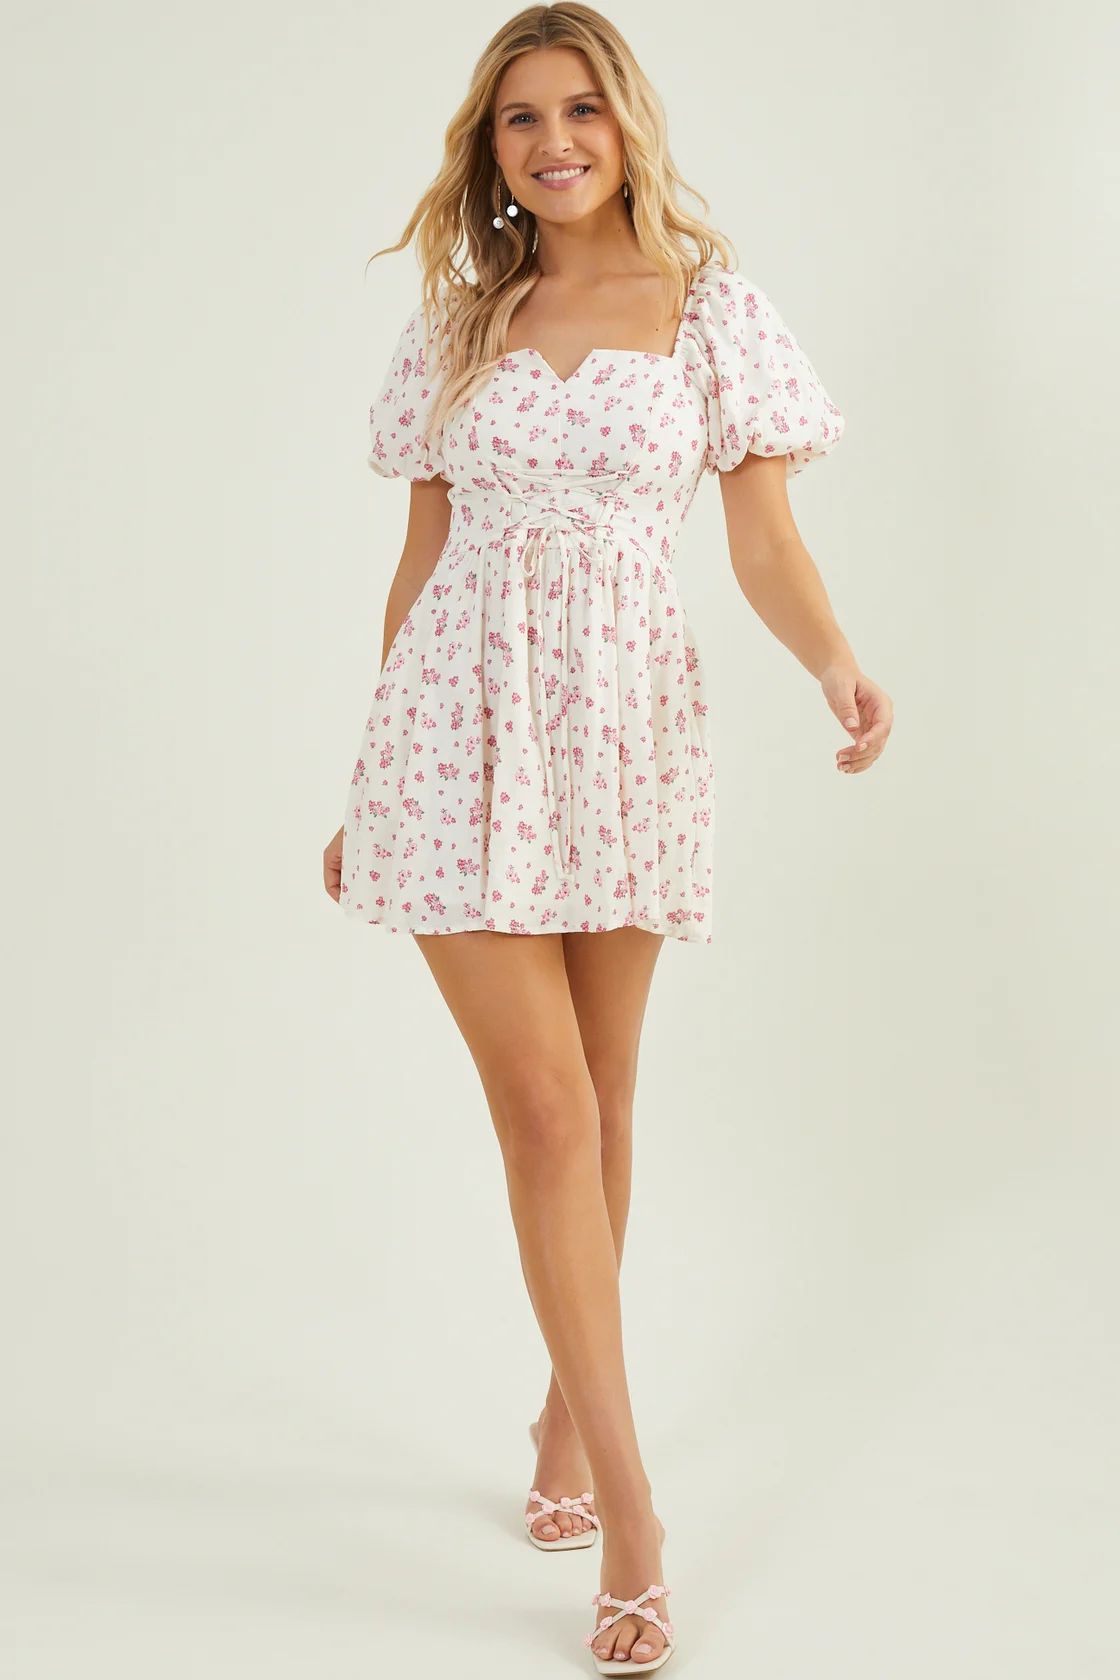 Jodee Puff Sleeve Dress in White & Pink | Altar'd State | Altar'd State